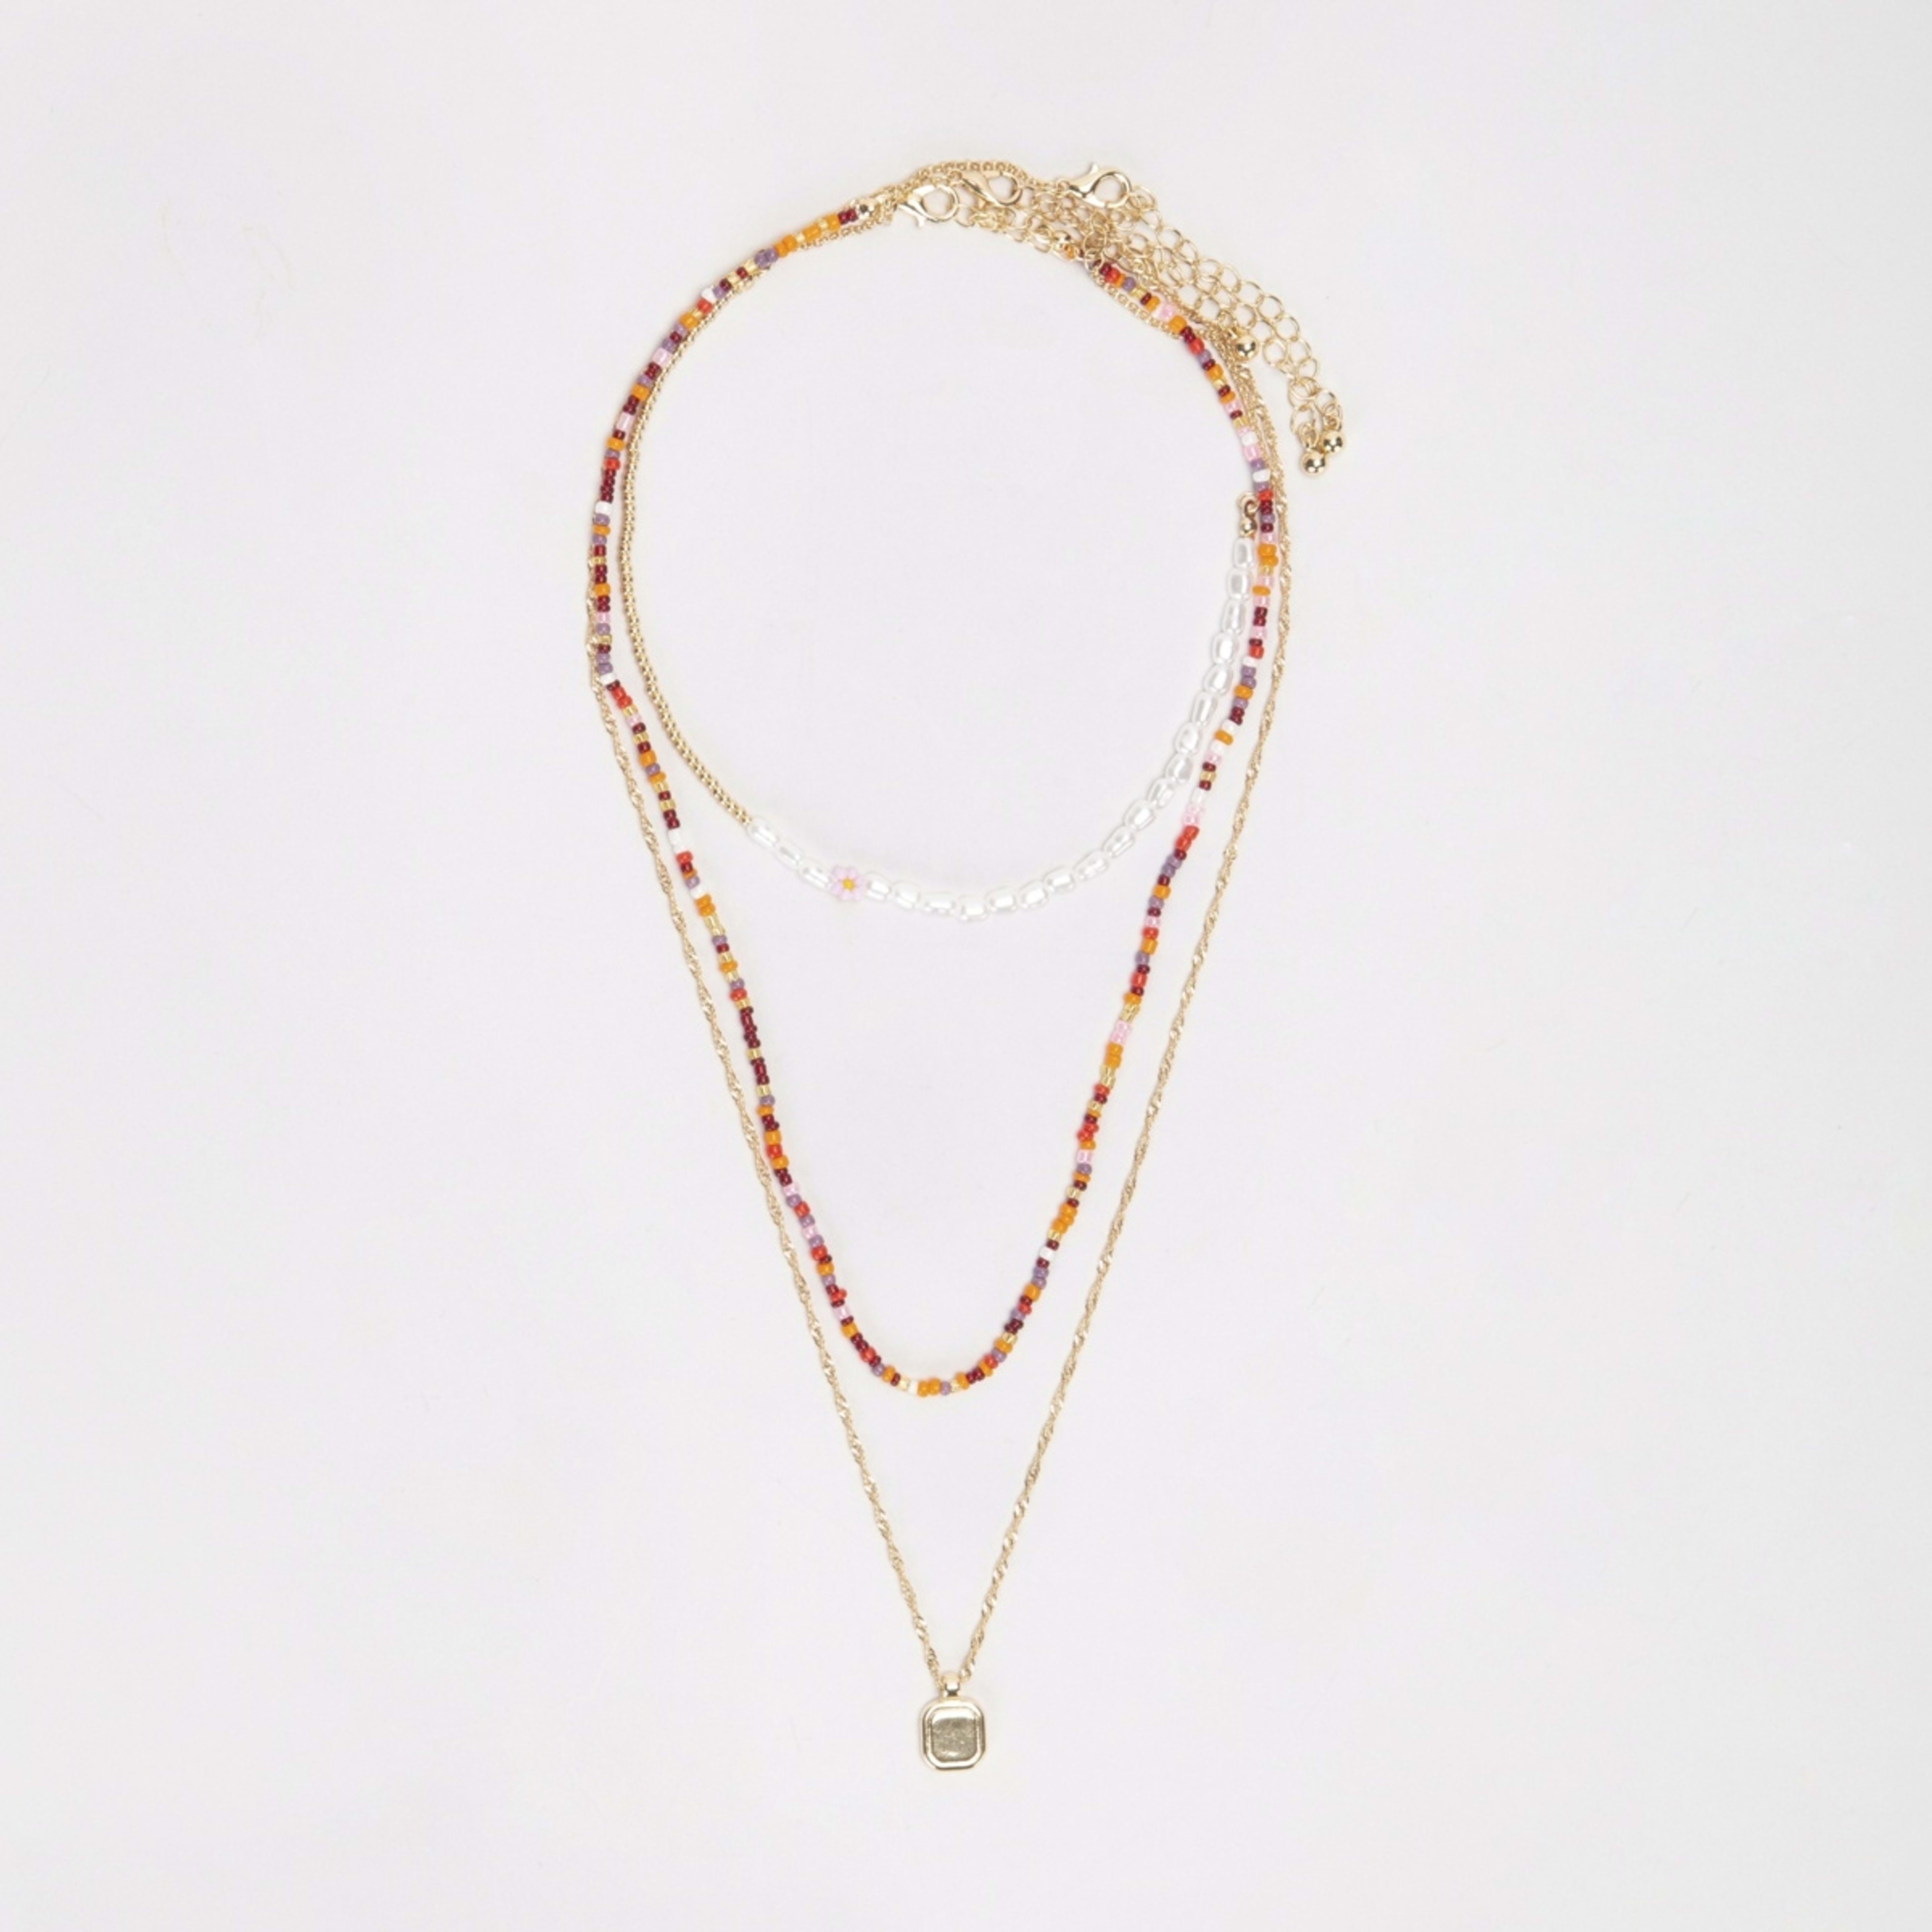 Thin Beaded Necklace - Gold Tone